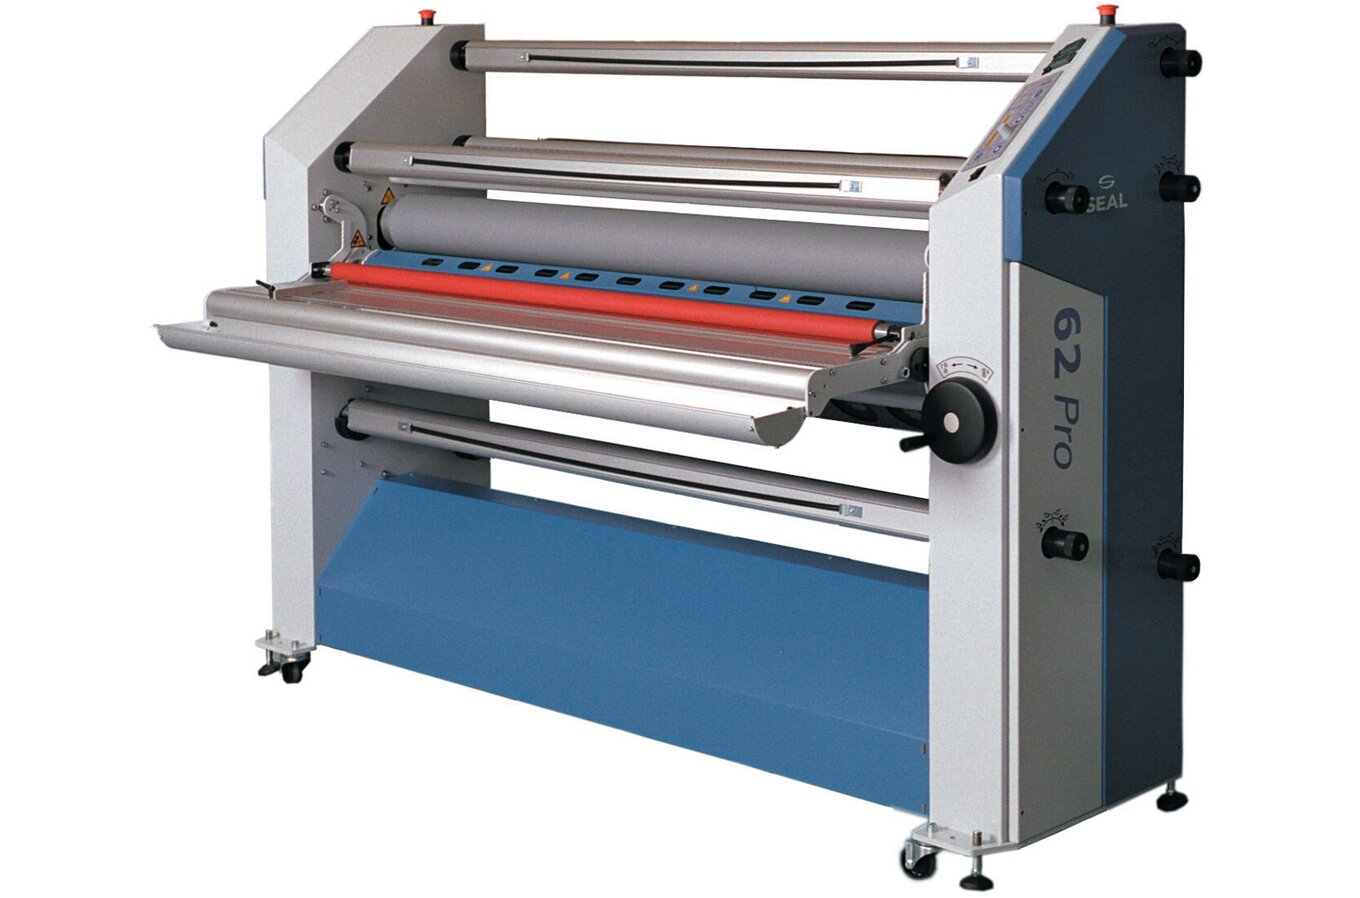 SEAL 62 Pro D Laminator, 61" Max. Width - Call For Special Prices and Promotions